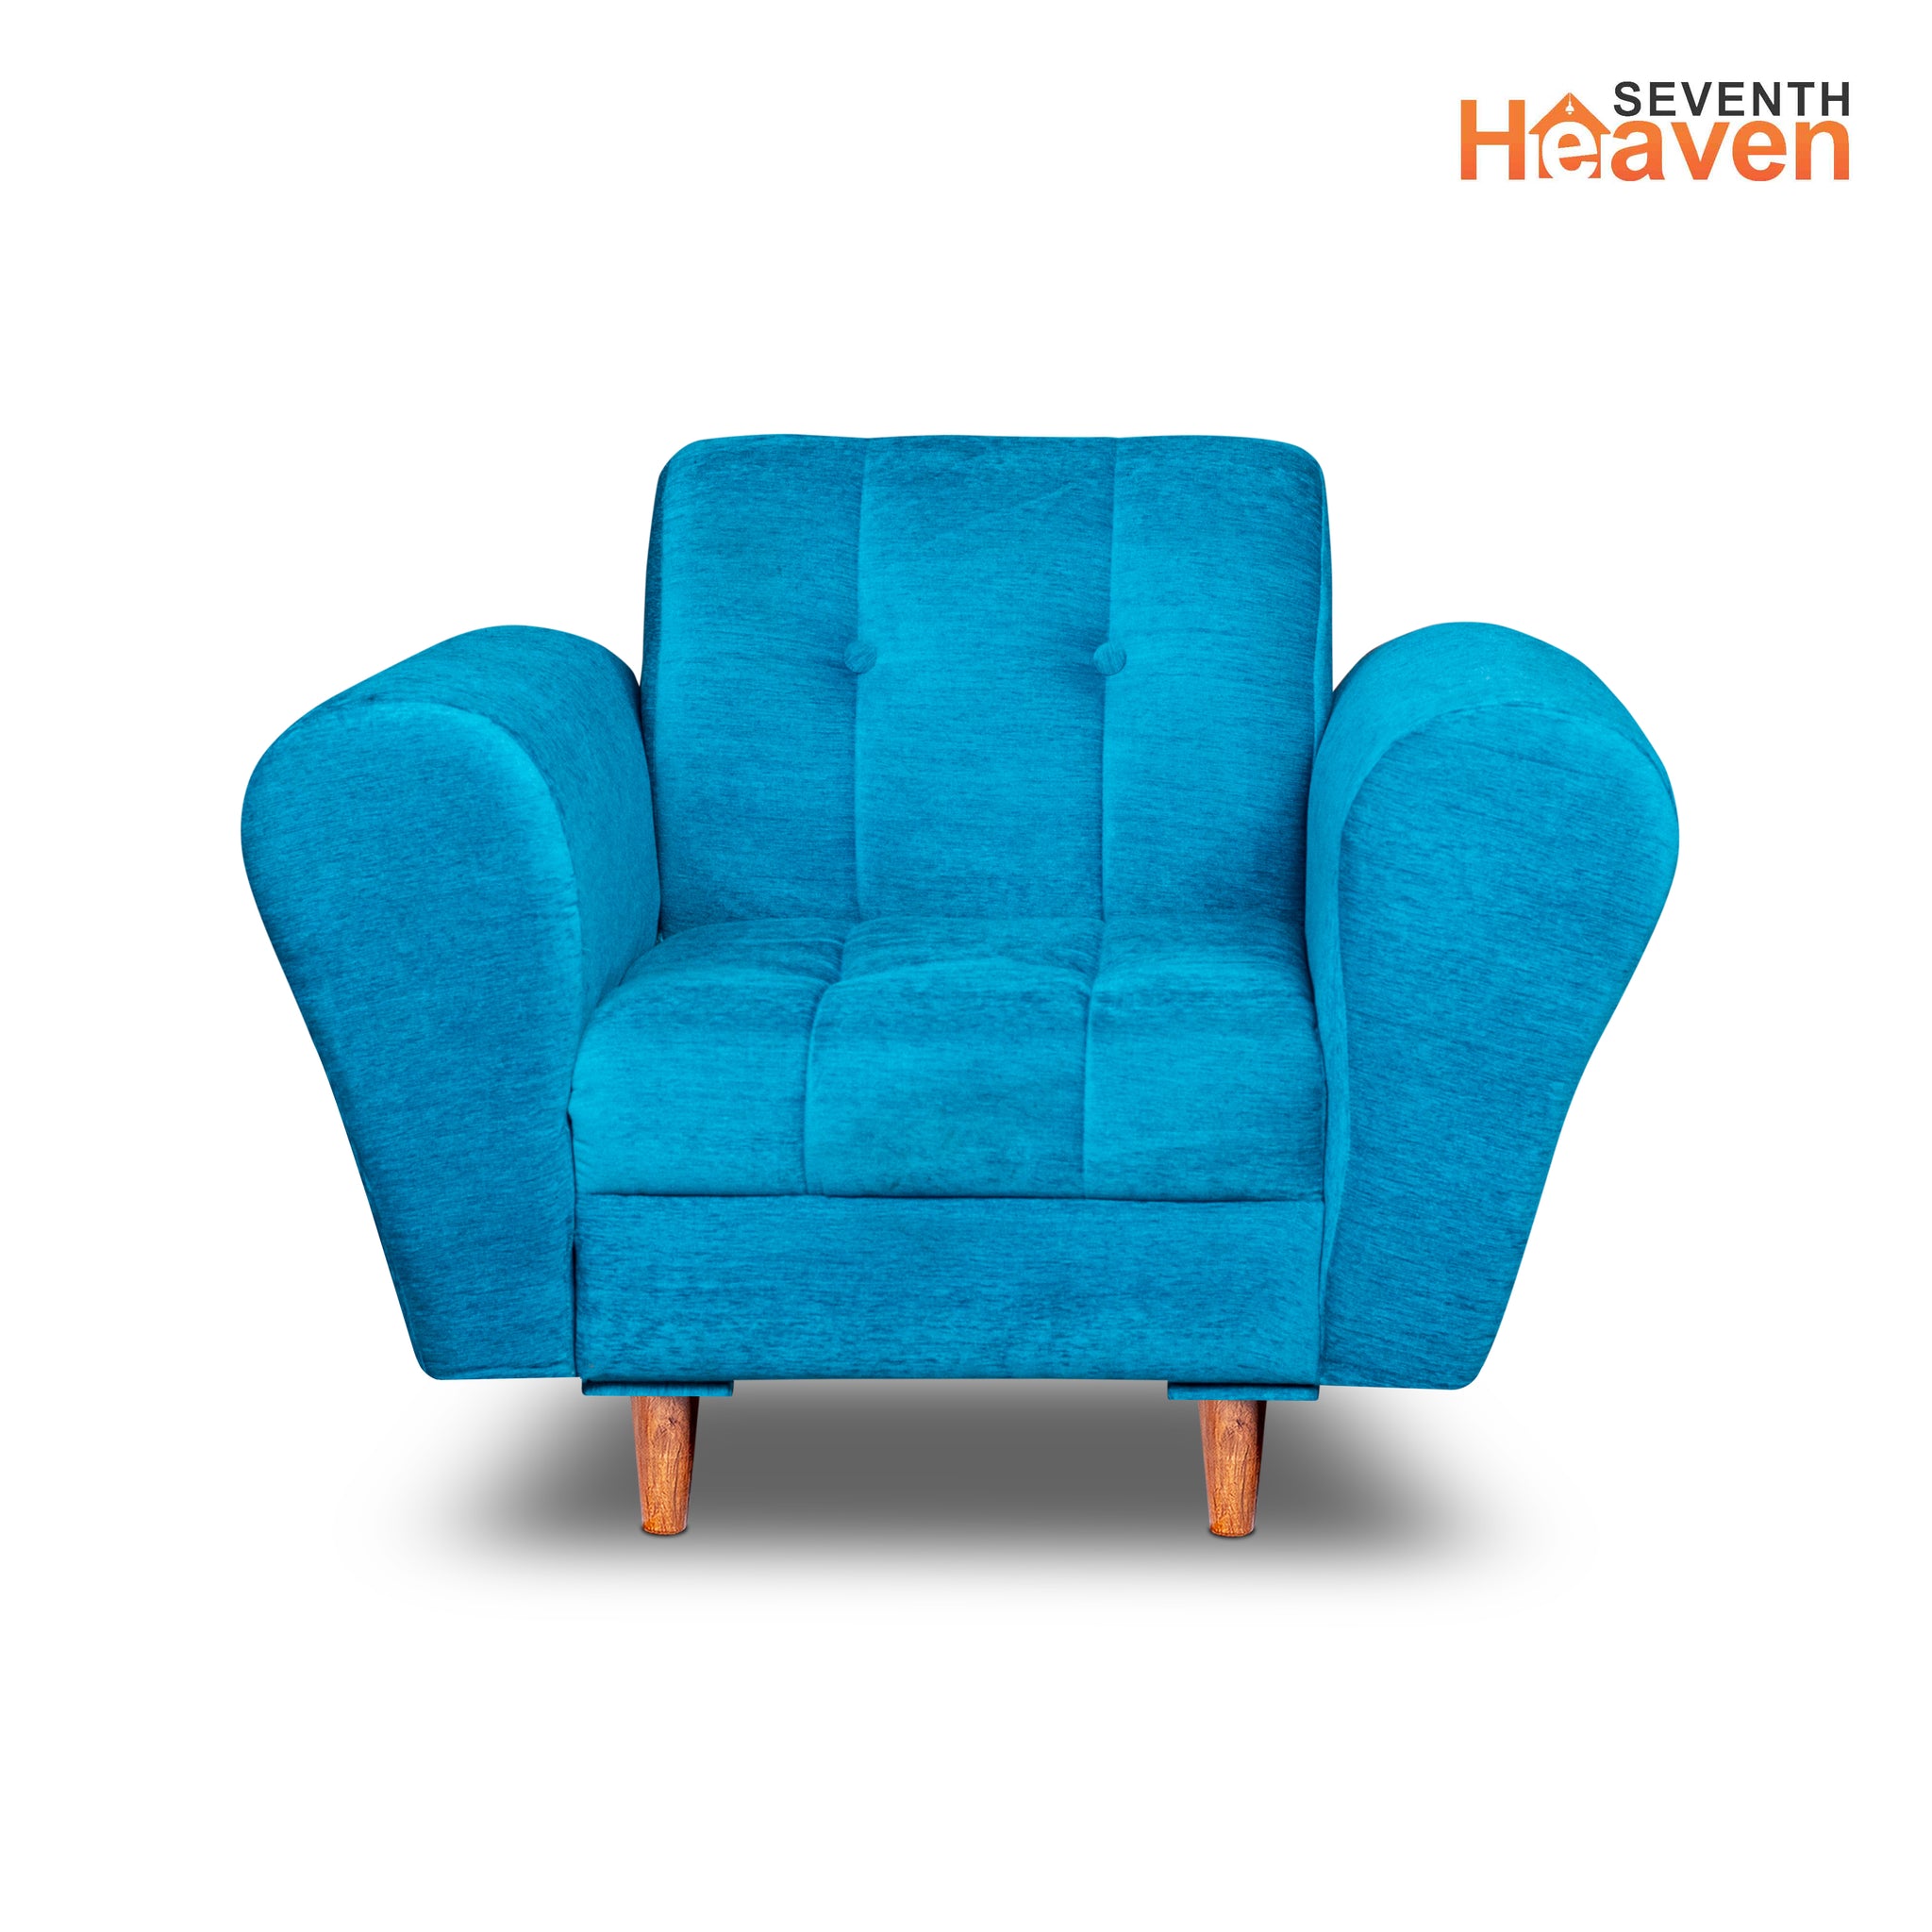 Seventh Heaven Milan 1 Seater Wooden Sofa Set Modern & Elegant Smart Furniture Range for luxurious homes, living rooms and offices. Sky Blue Colour Molphino fabric with sheesham polished wooden legs.